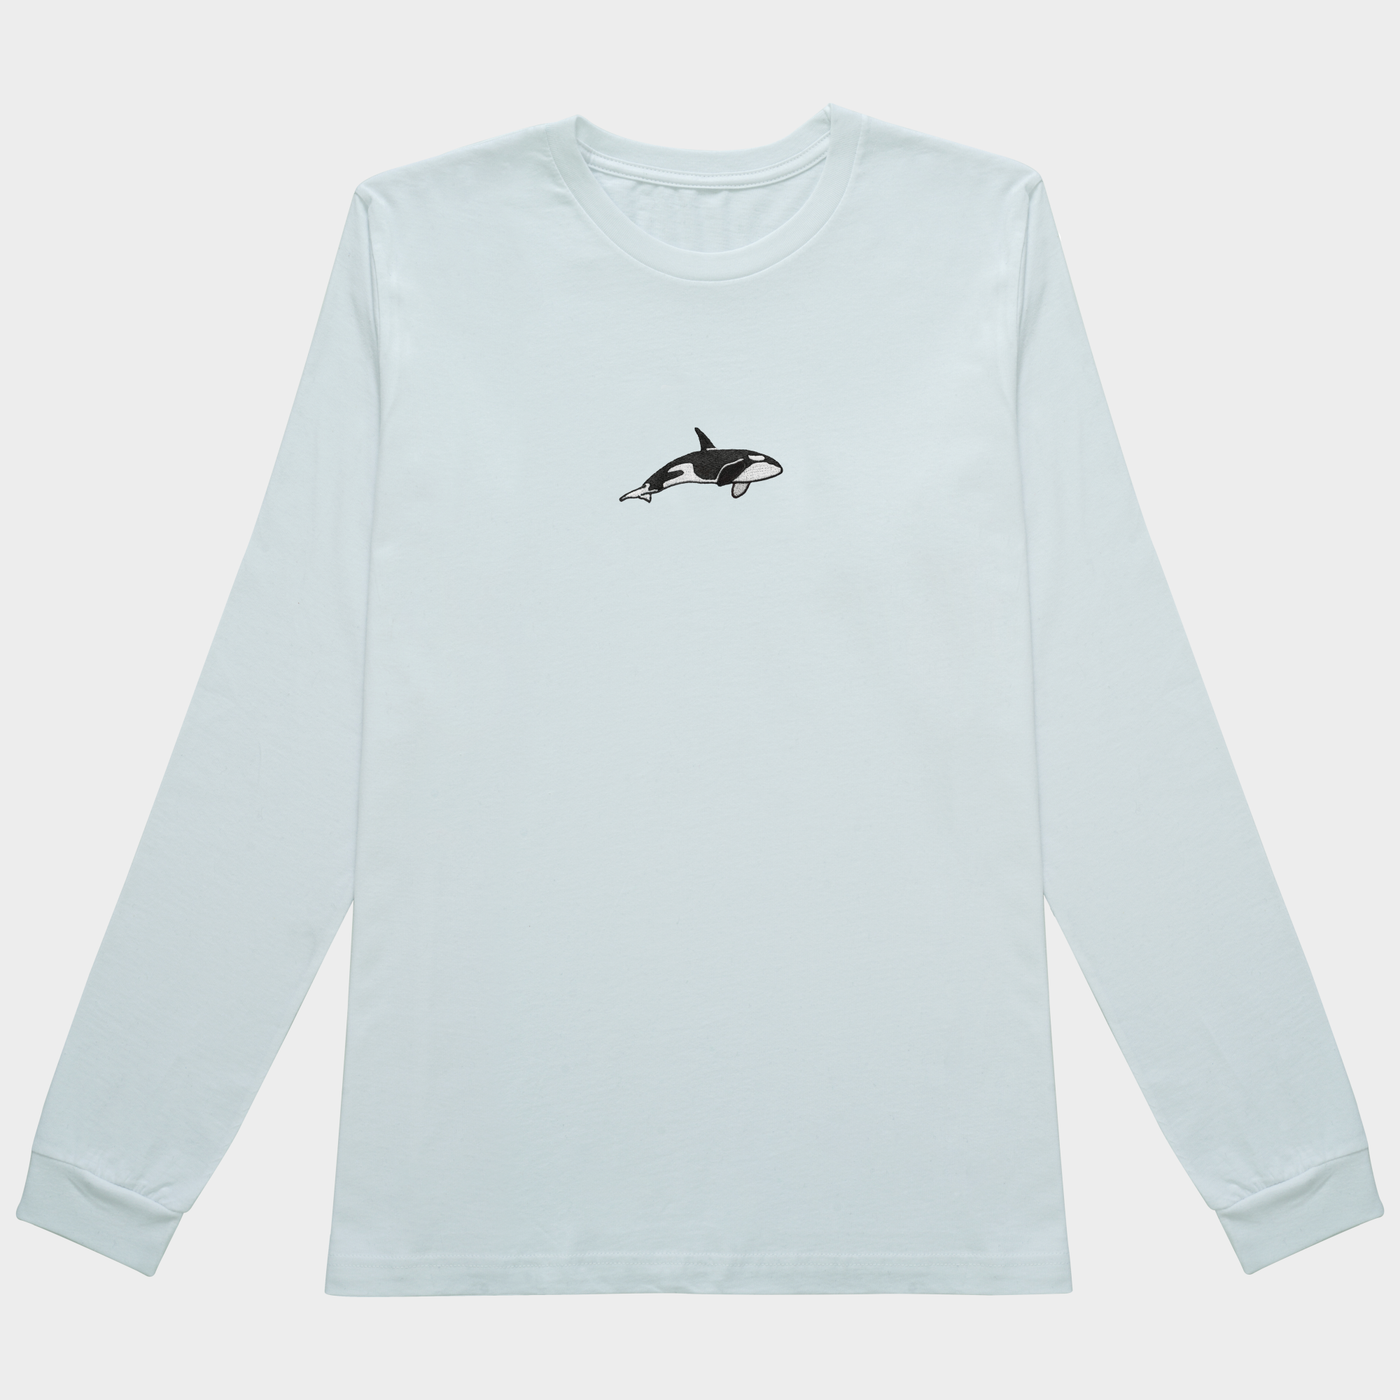 Bobby's Planet Men's Embroidered Orca Long Sleeve Shirt from Seven Seas Fish Animals Collection in White Color#color_white